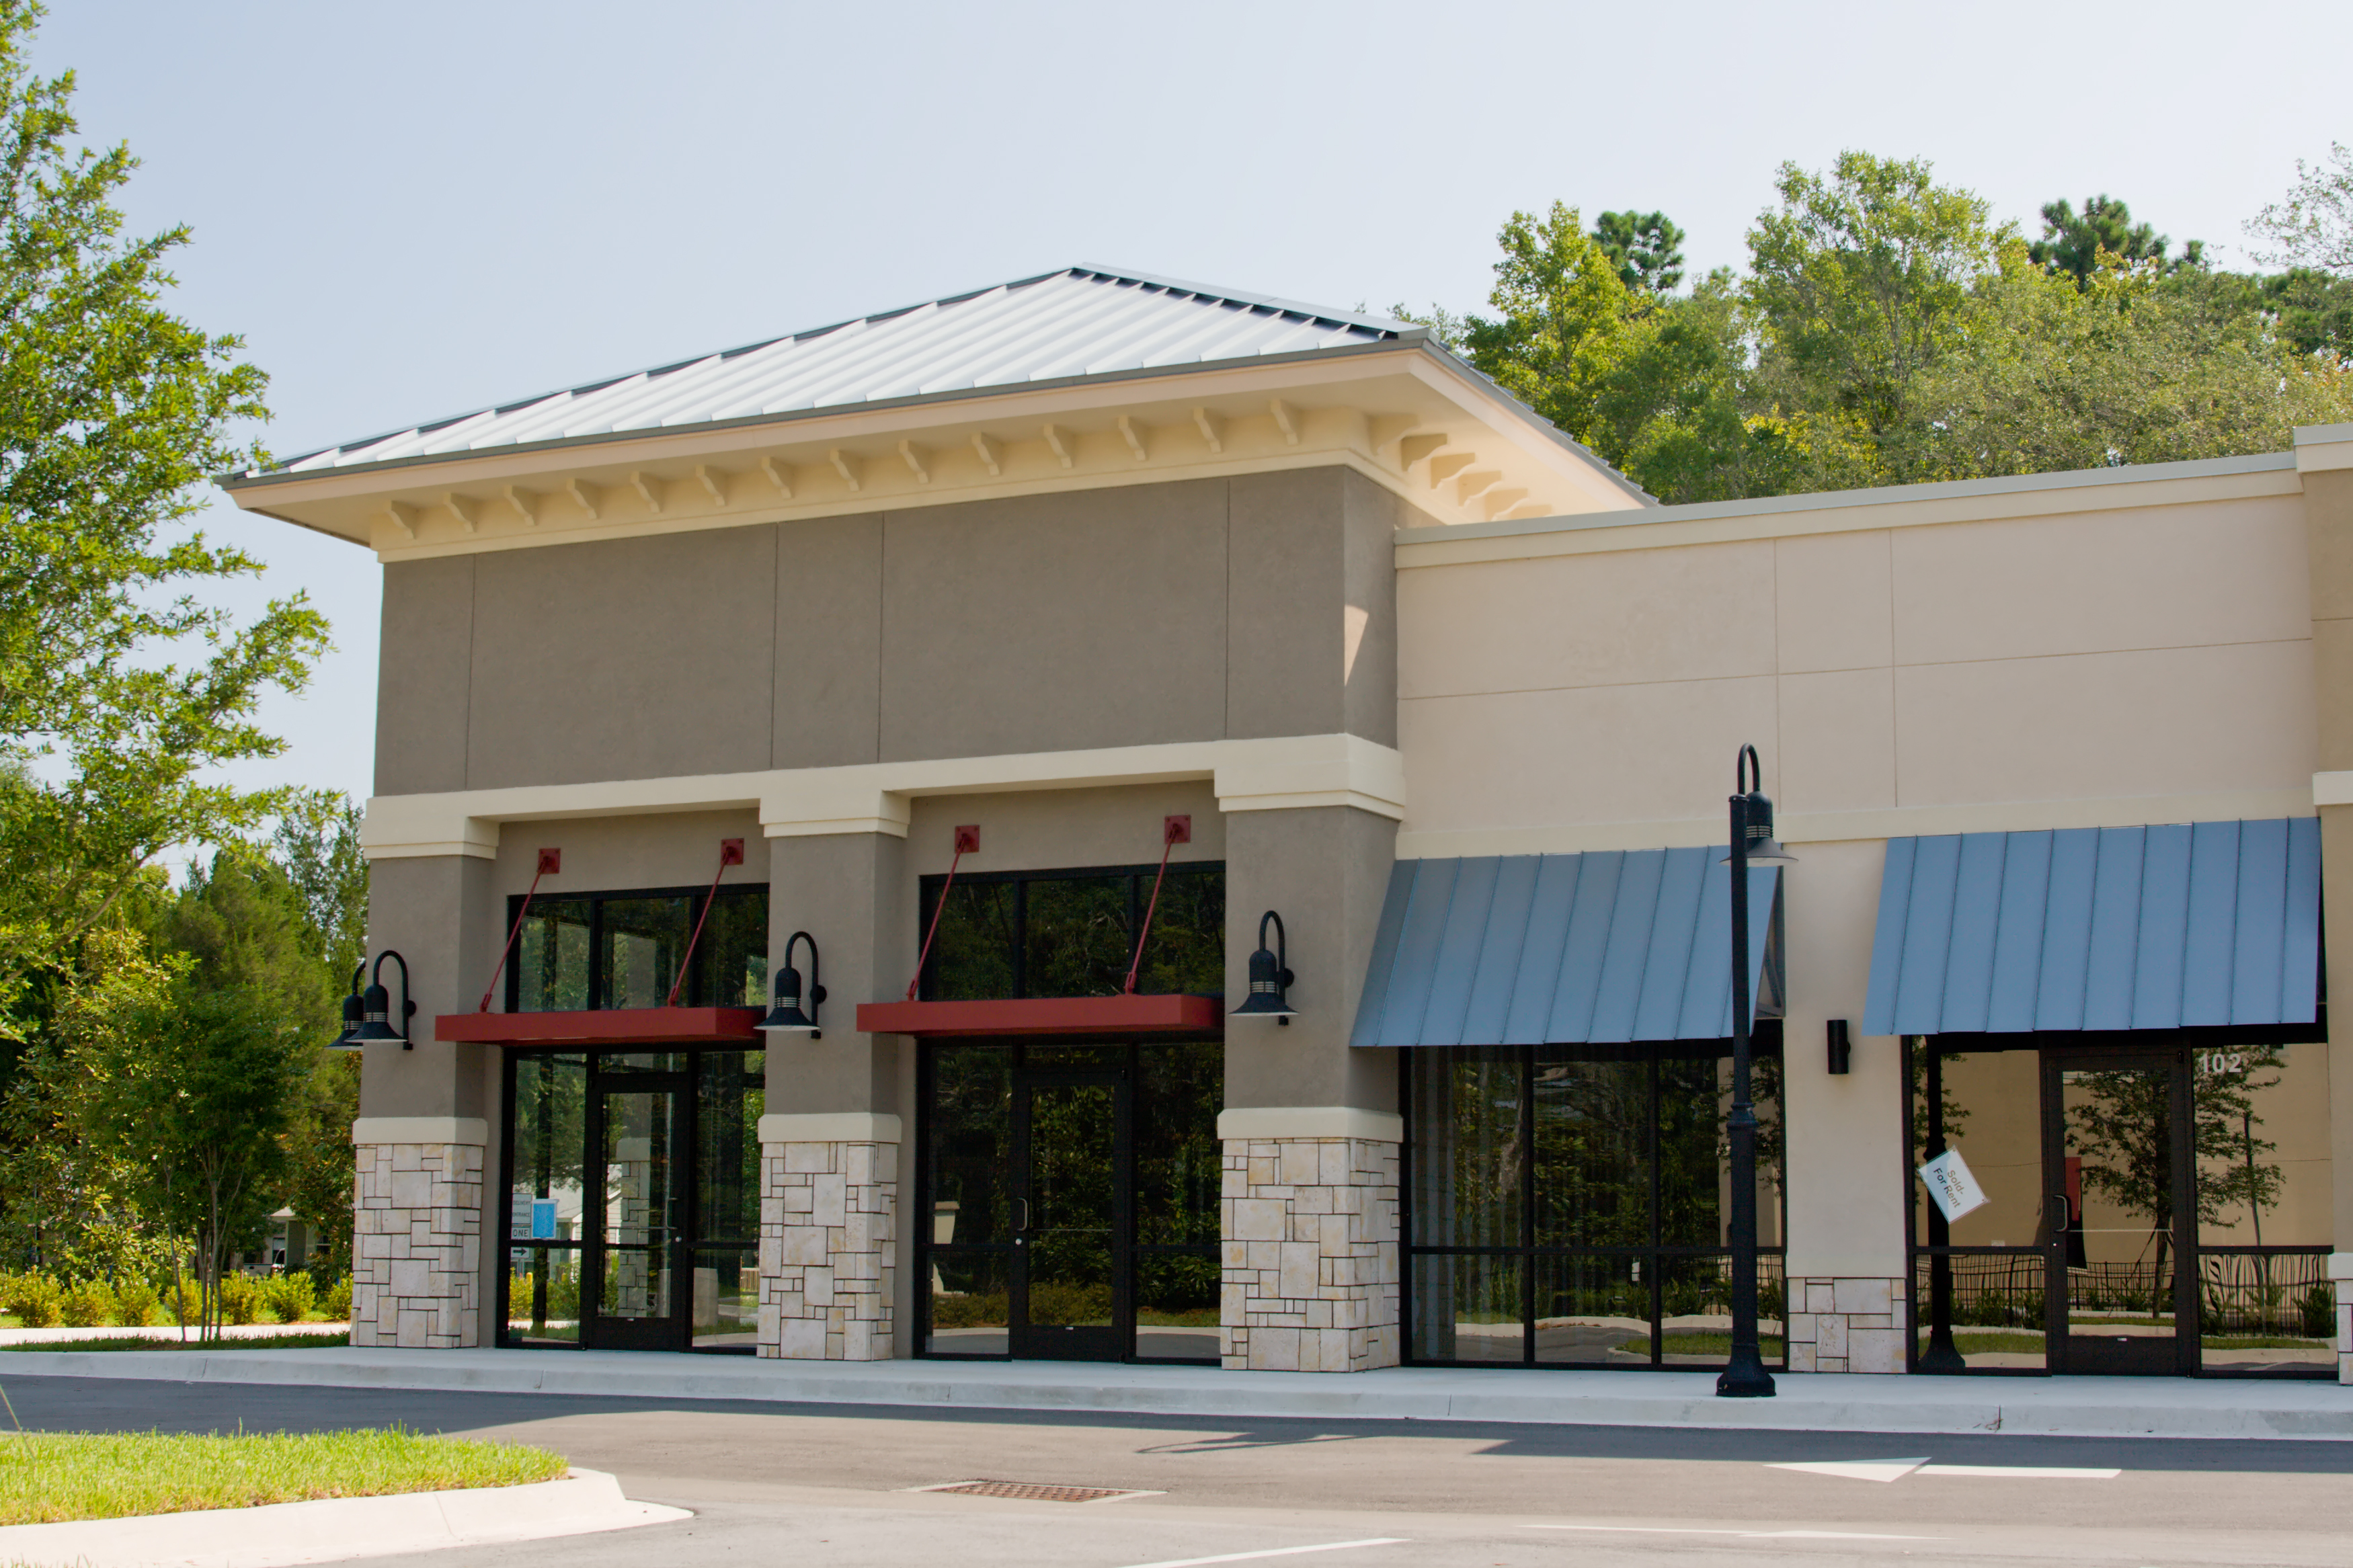 Commercial Office/Retail painting by CertaPro painters in Alexandria, VA